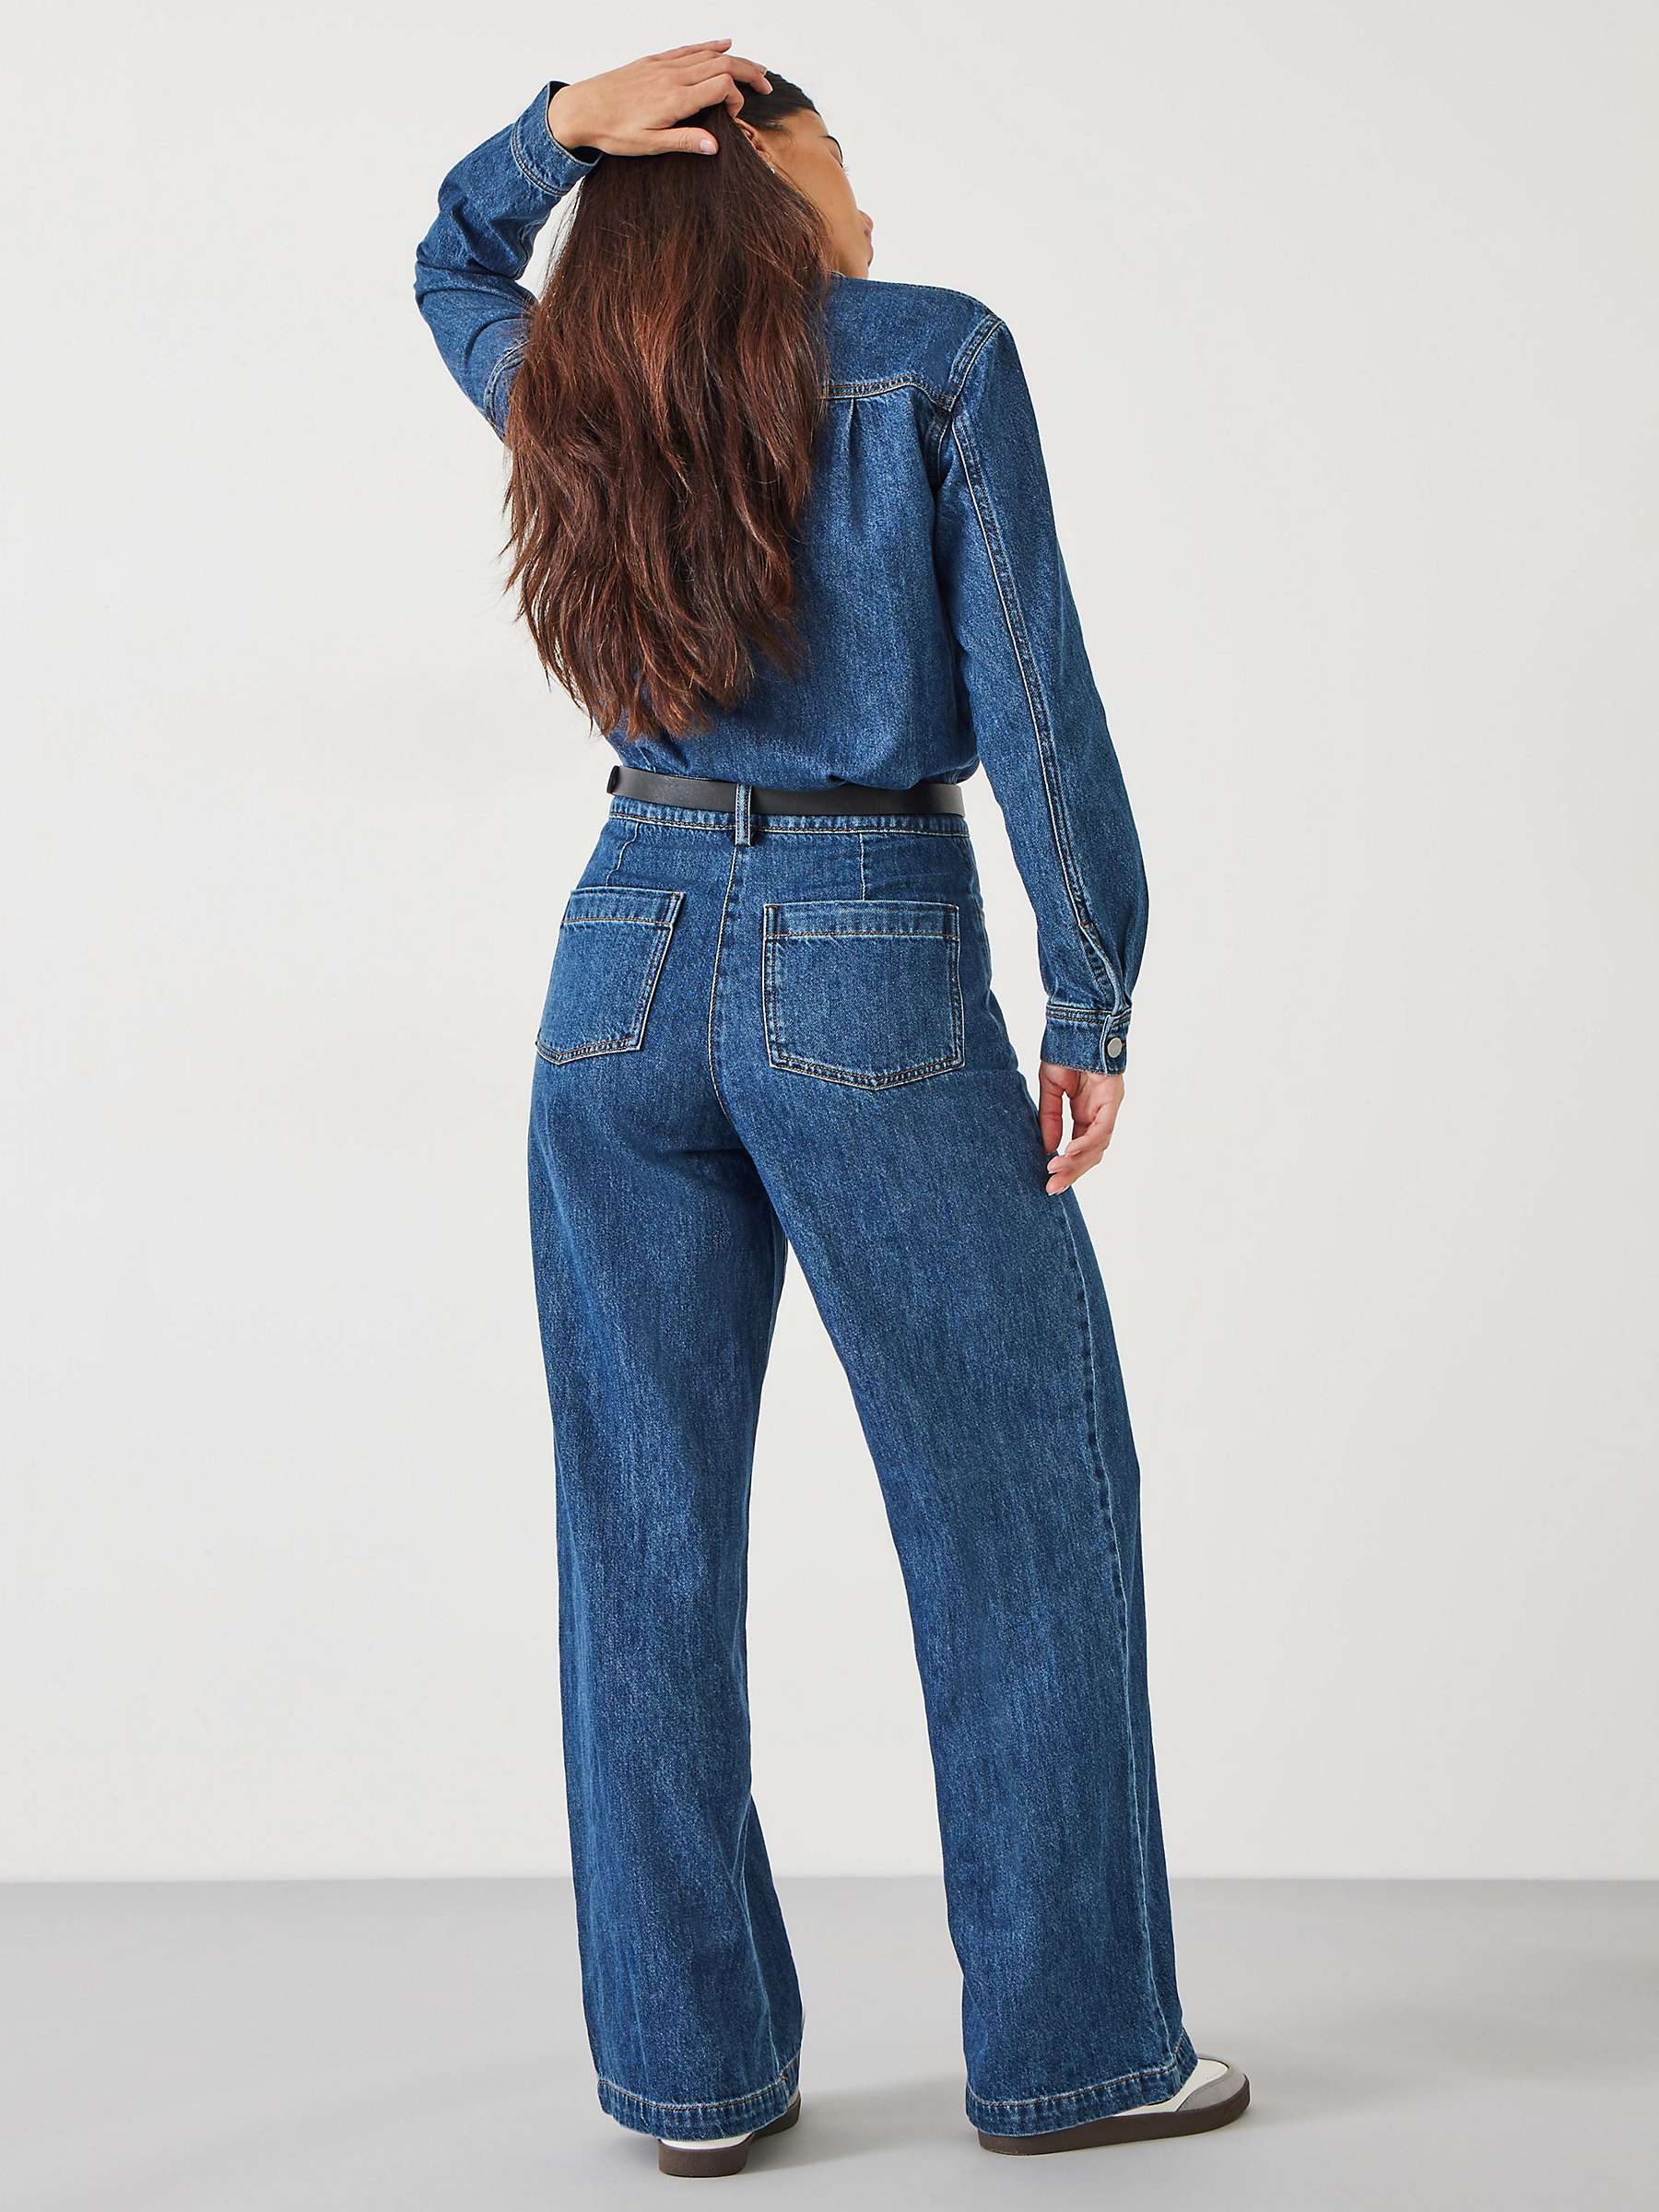 Buy HUSH Evelyn Denim Relaxed Jumpsuit, Mid Authentic Wash Online at johnlewis.com